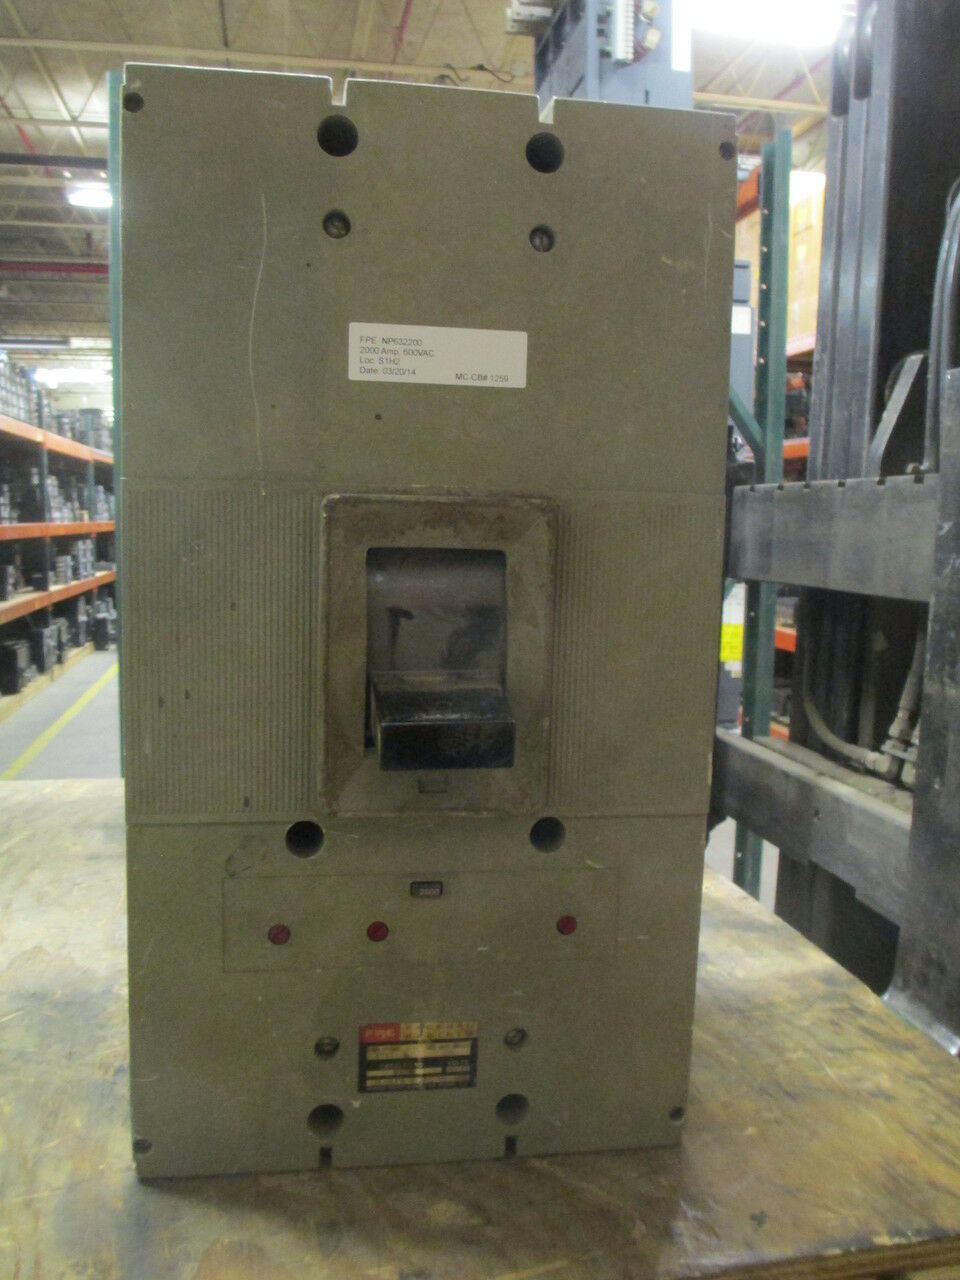 FPE NP631000 2000A Frame 2000A Rated 3P 600V MO/FM Circuit Breaker Used EOk - $4,000.00